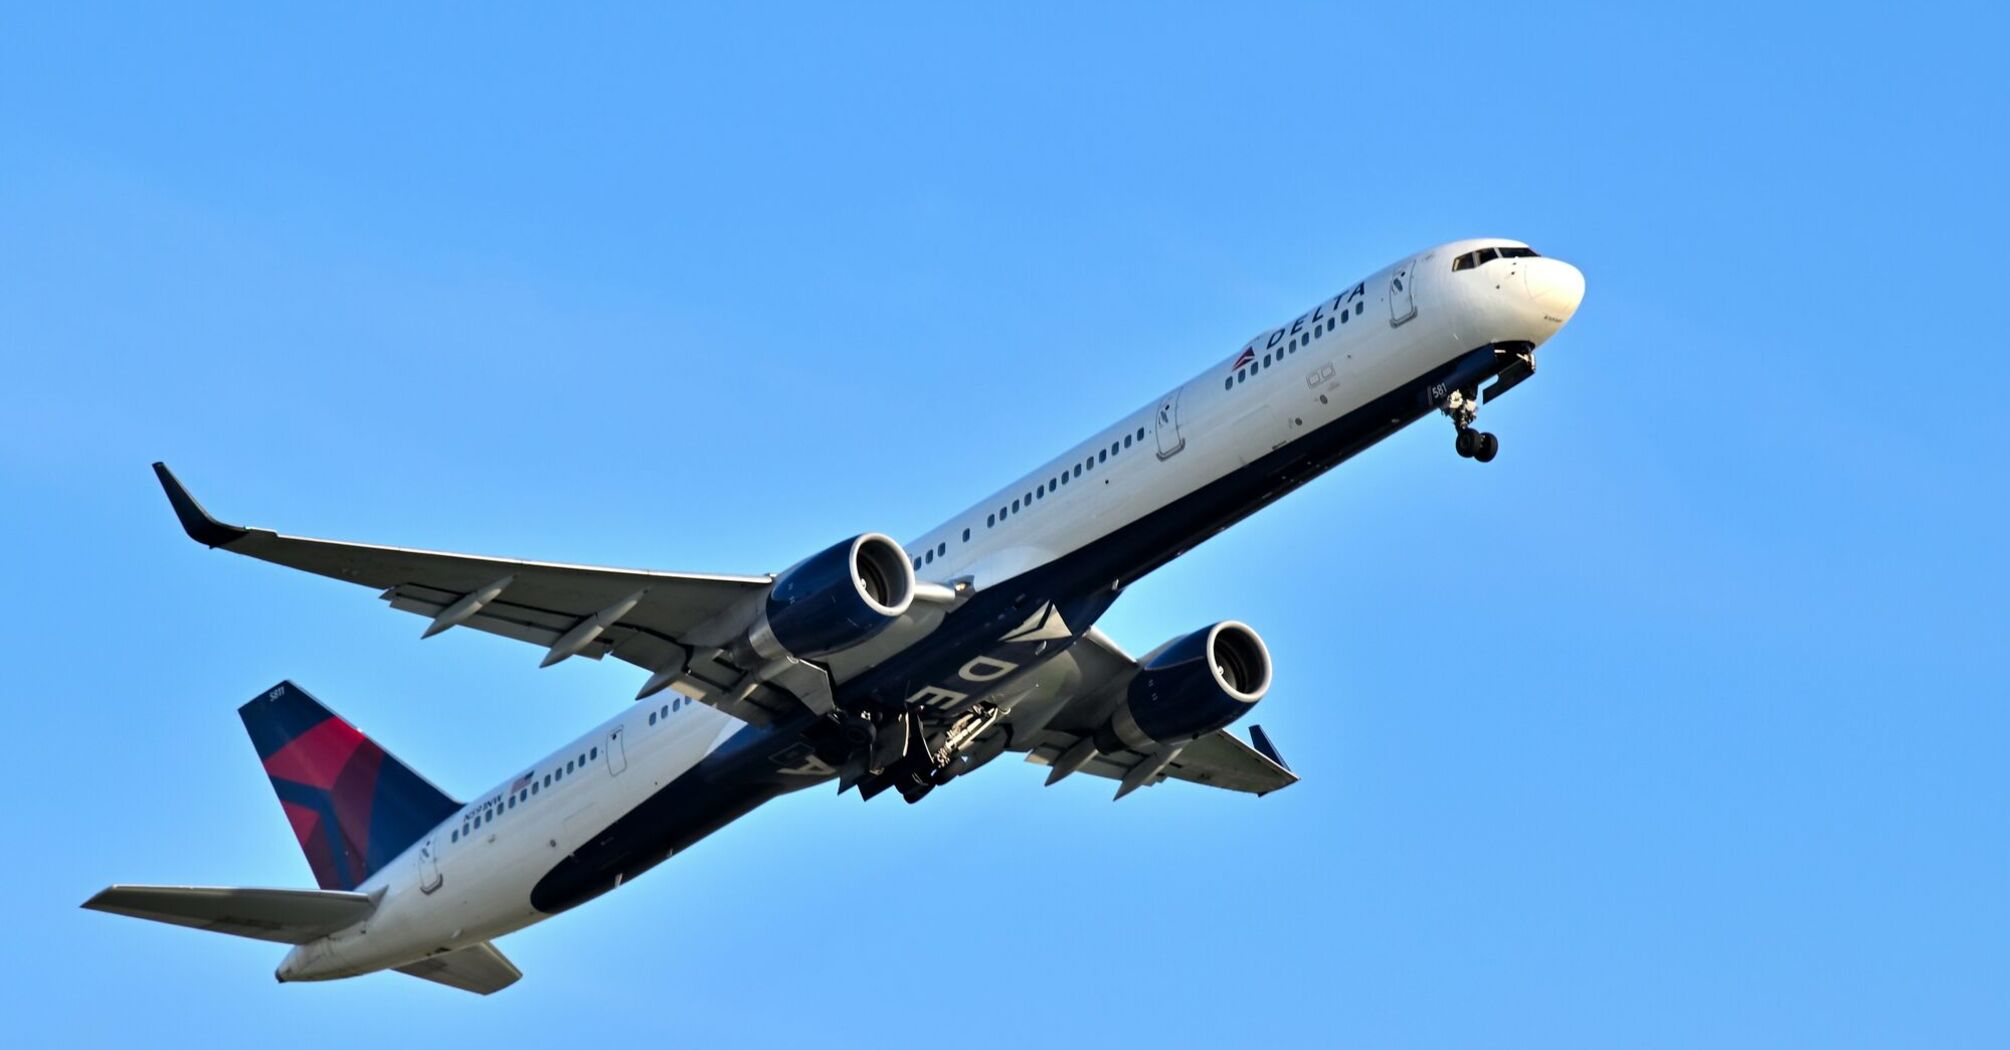 A large Boeing 757 airplane flying in the sky